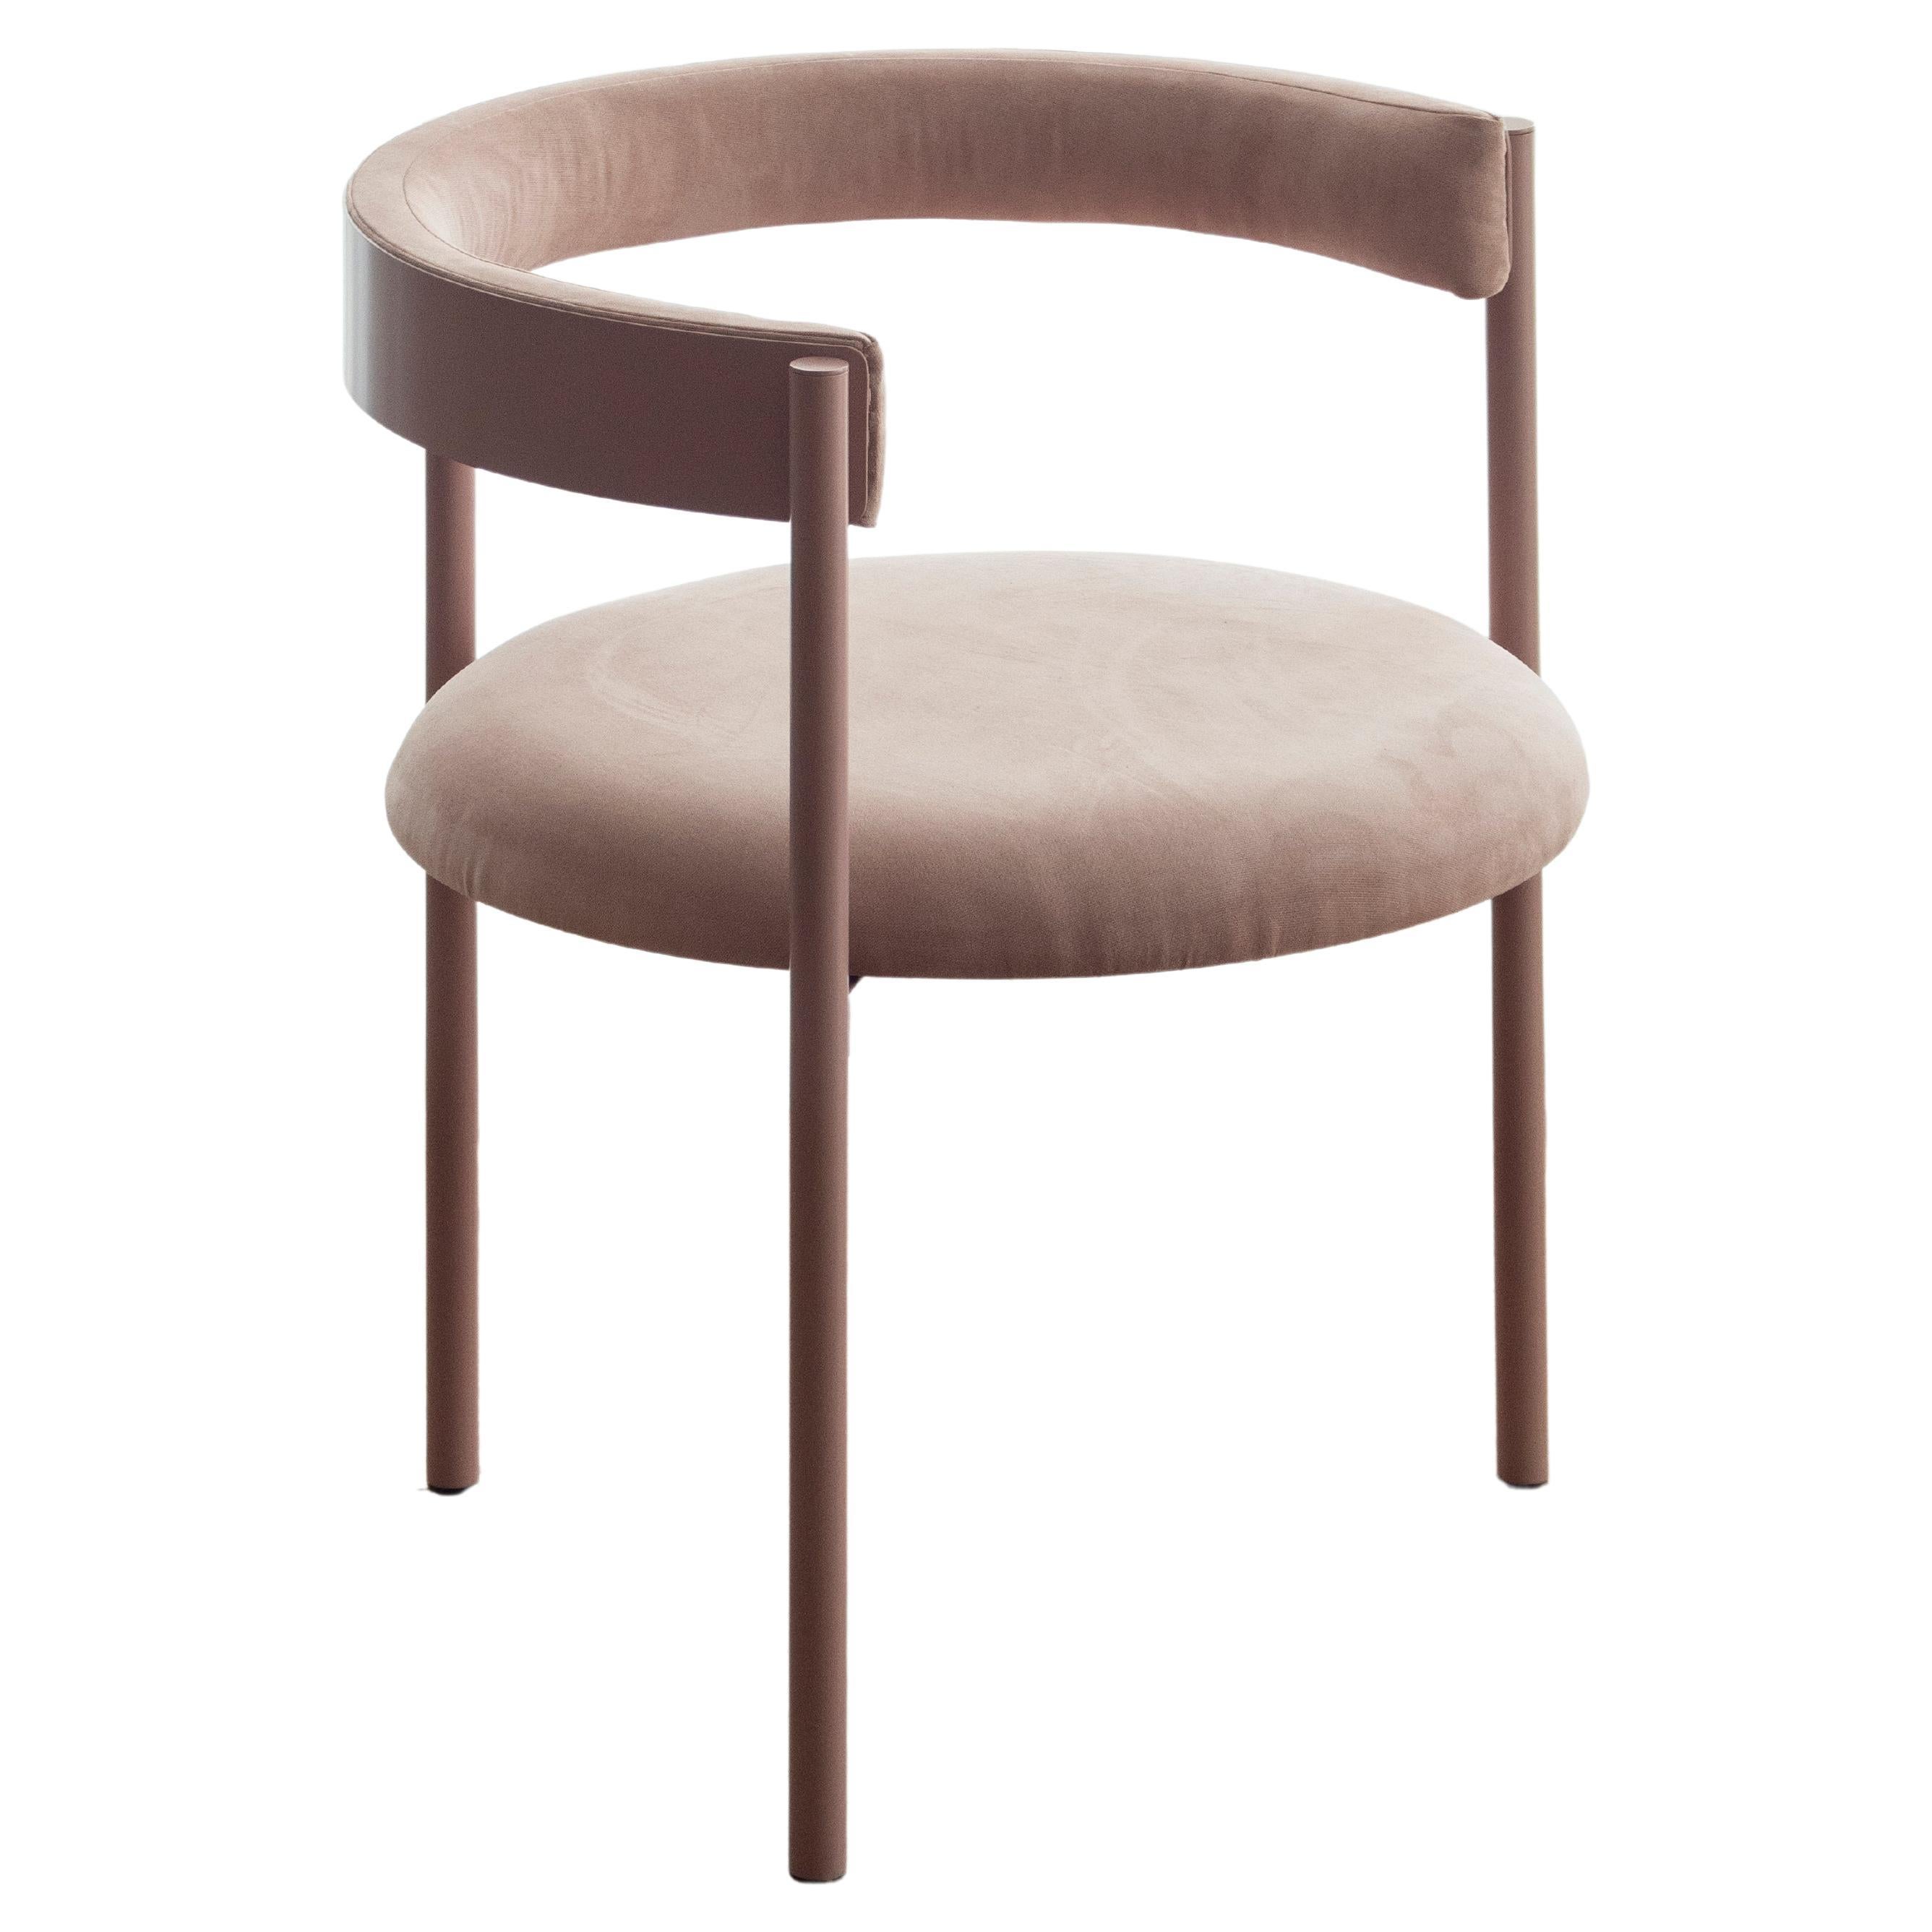 Aro Chair, Pink by Ries